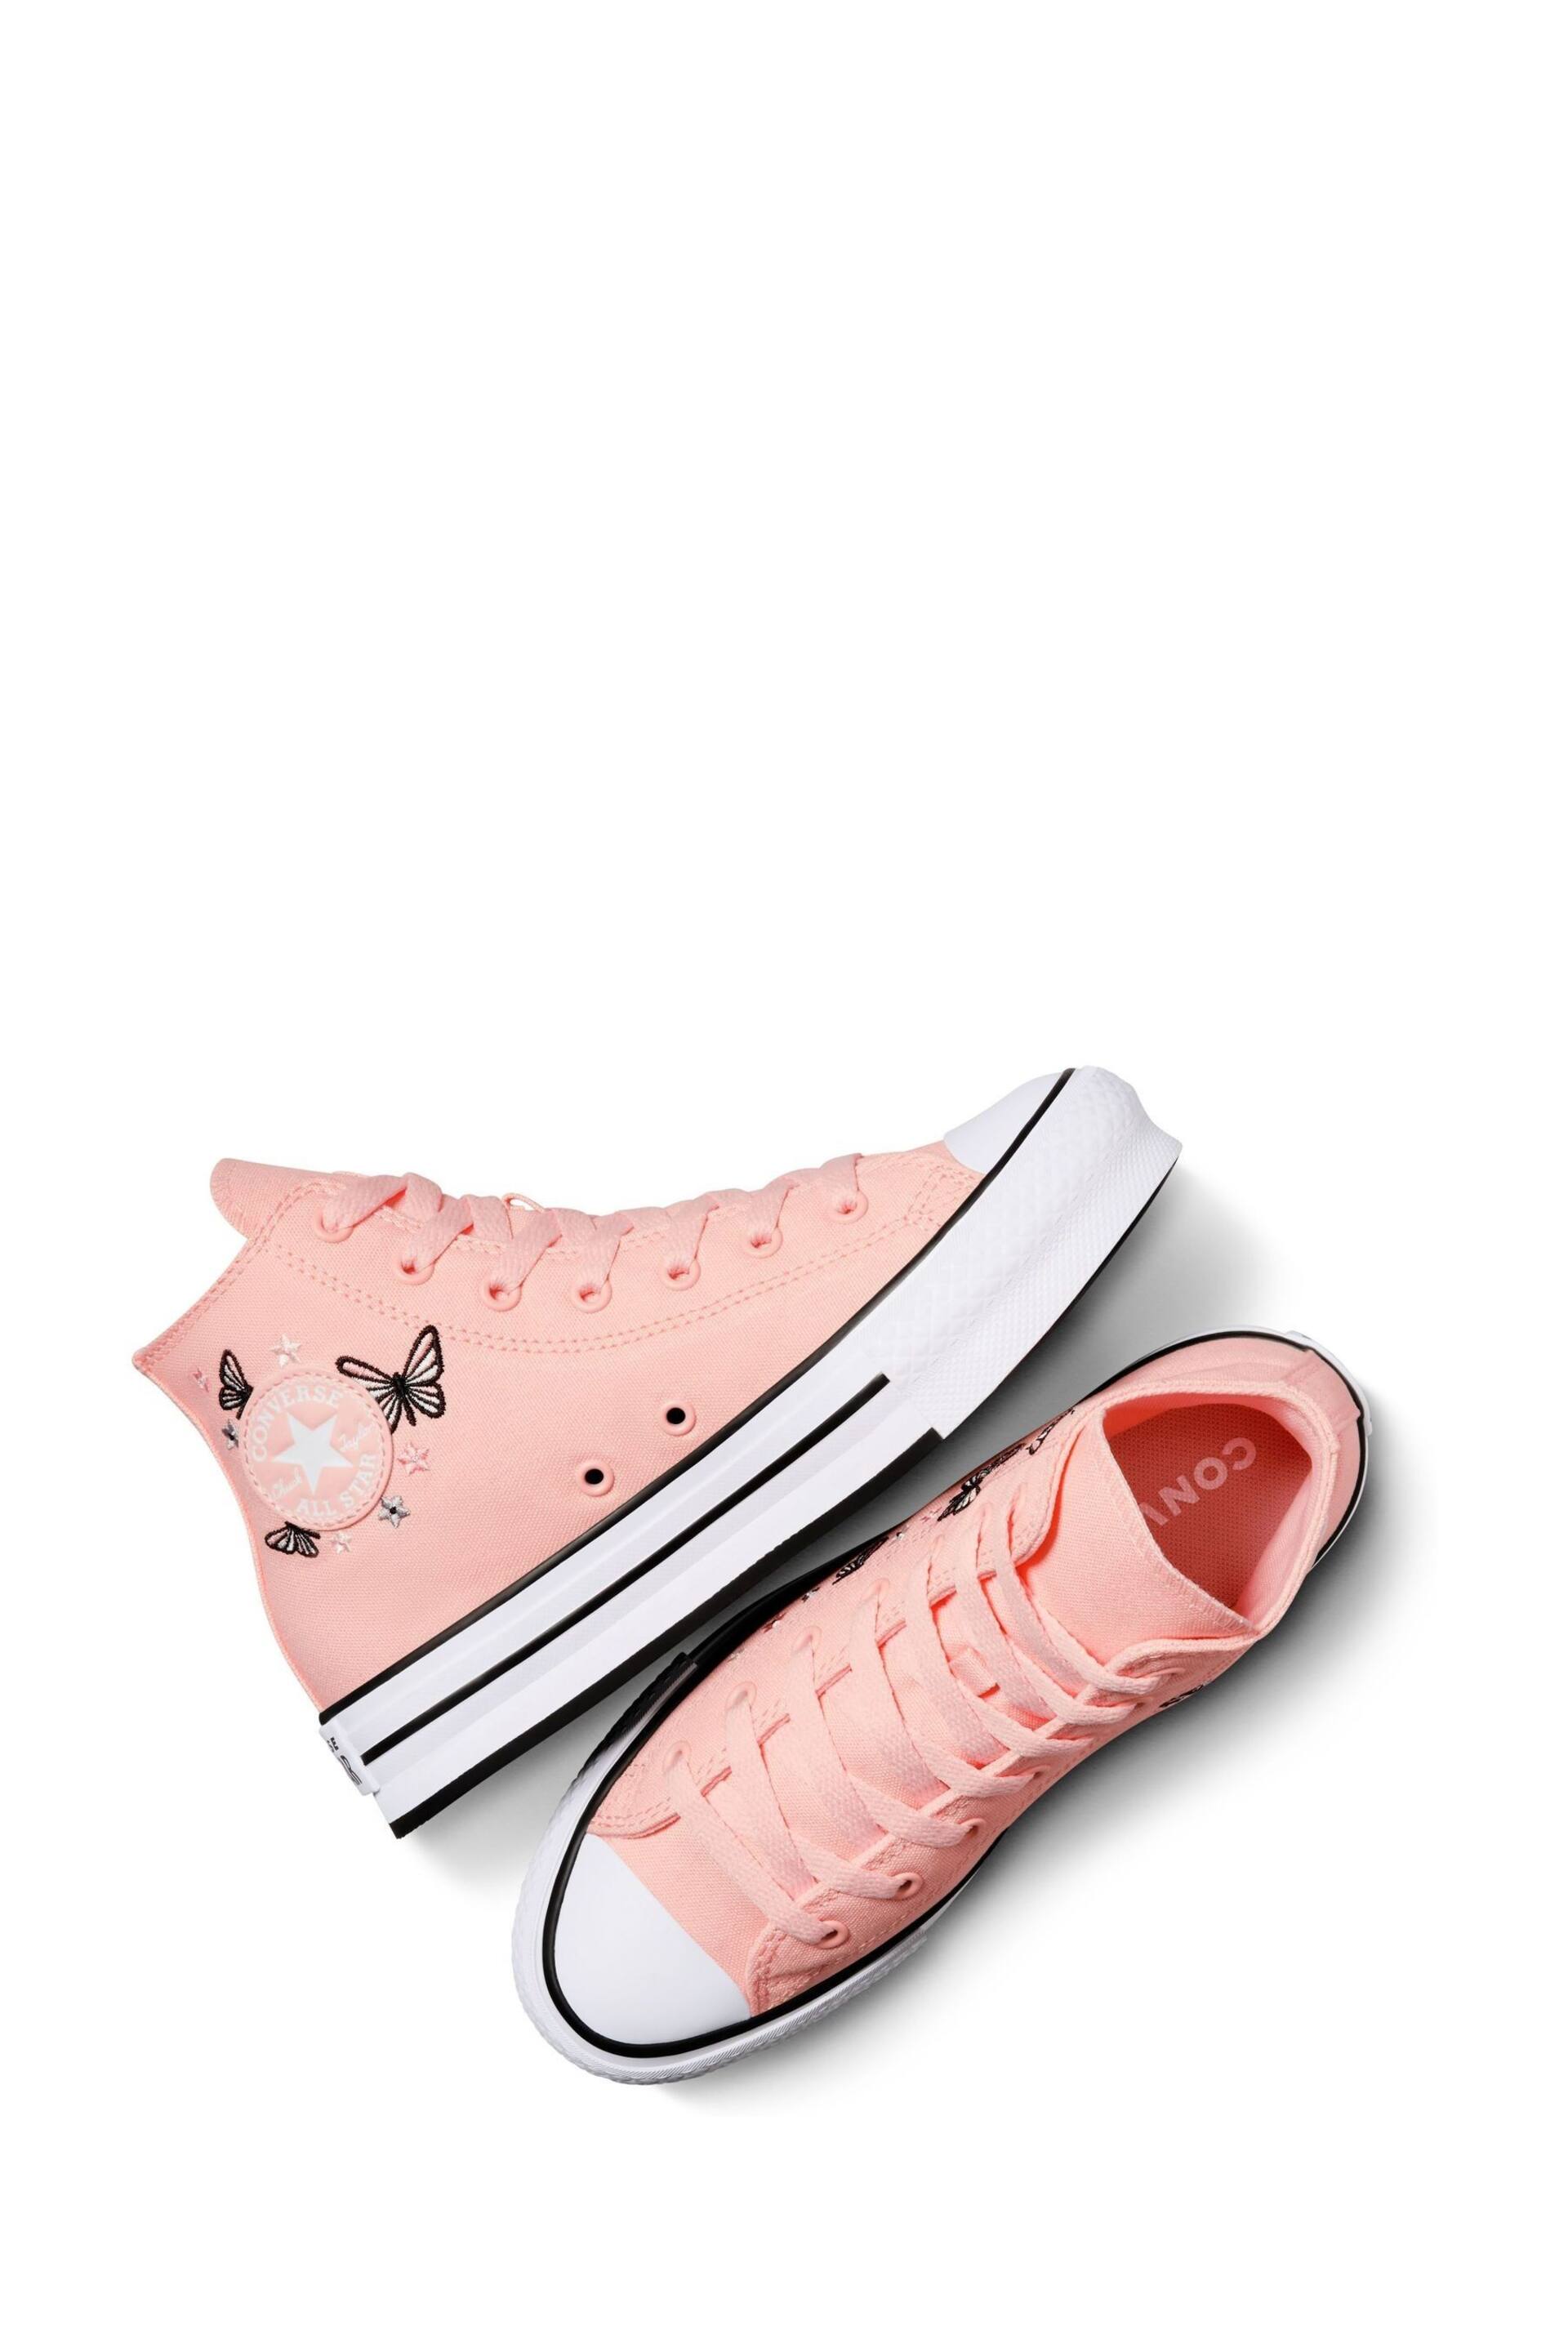 Converse Pink Butterfly Embroidered EVA Lift Youth Trainers - Image 8 of 9